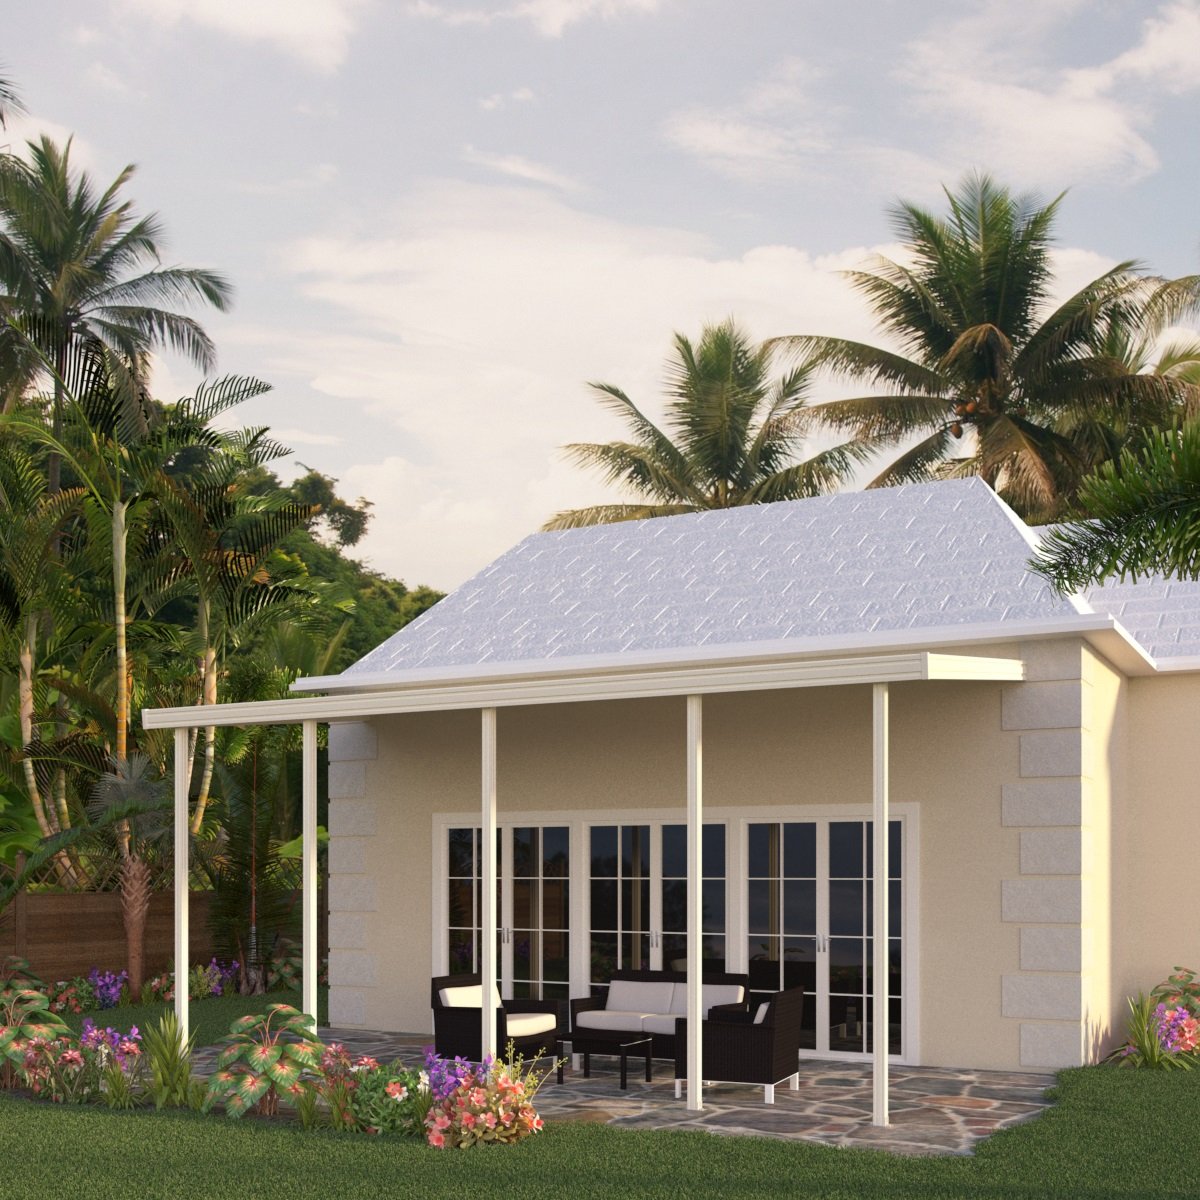 08 ft. Deep x 22 ft. Wide Ivory Attached Aluminum Patio Cover -4 Posts - (30lb Medium/High Snow Area)